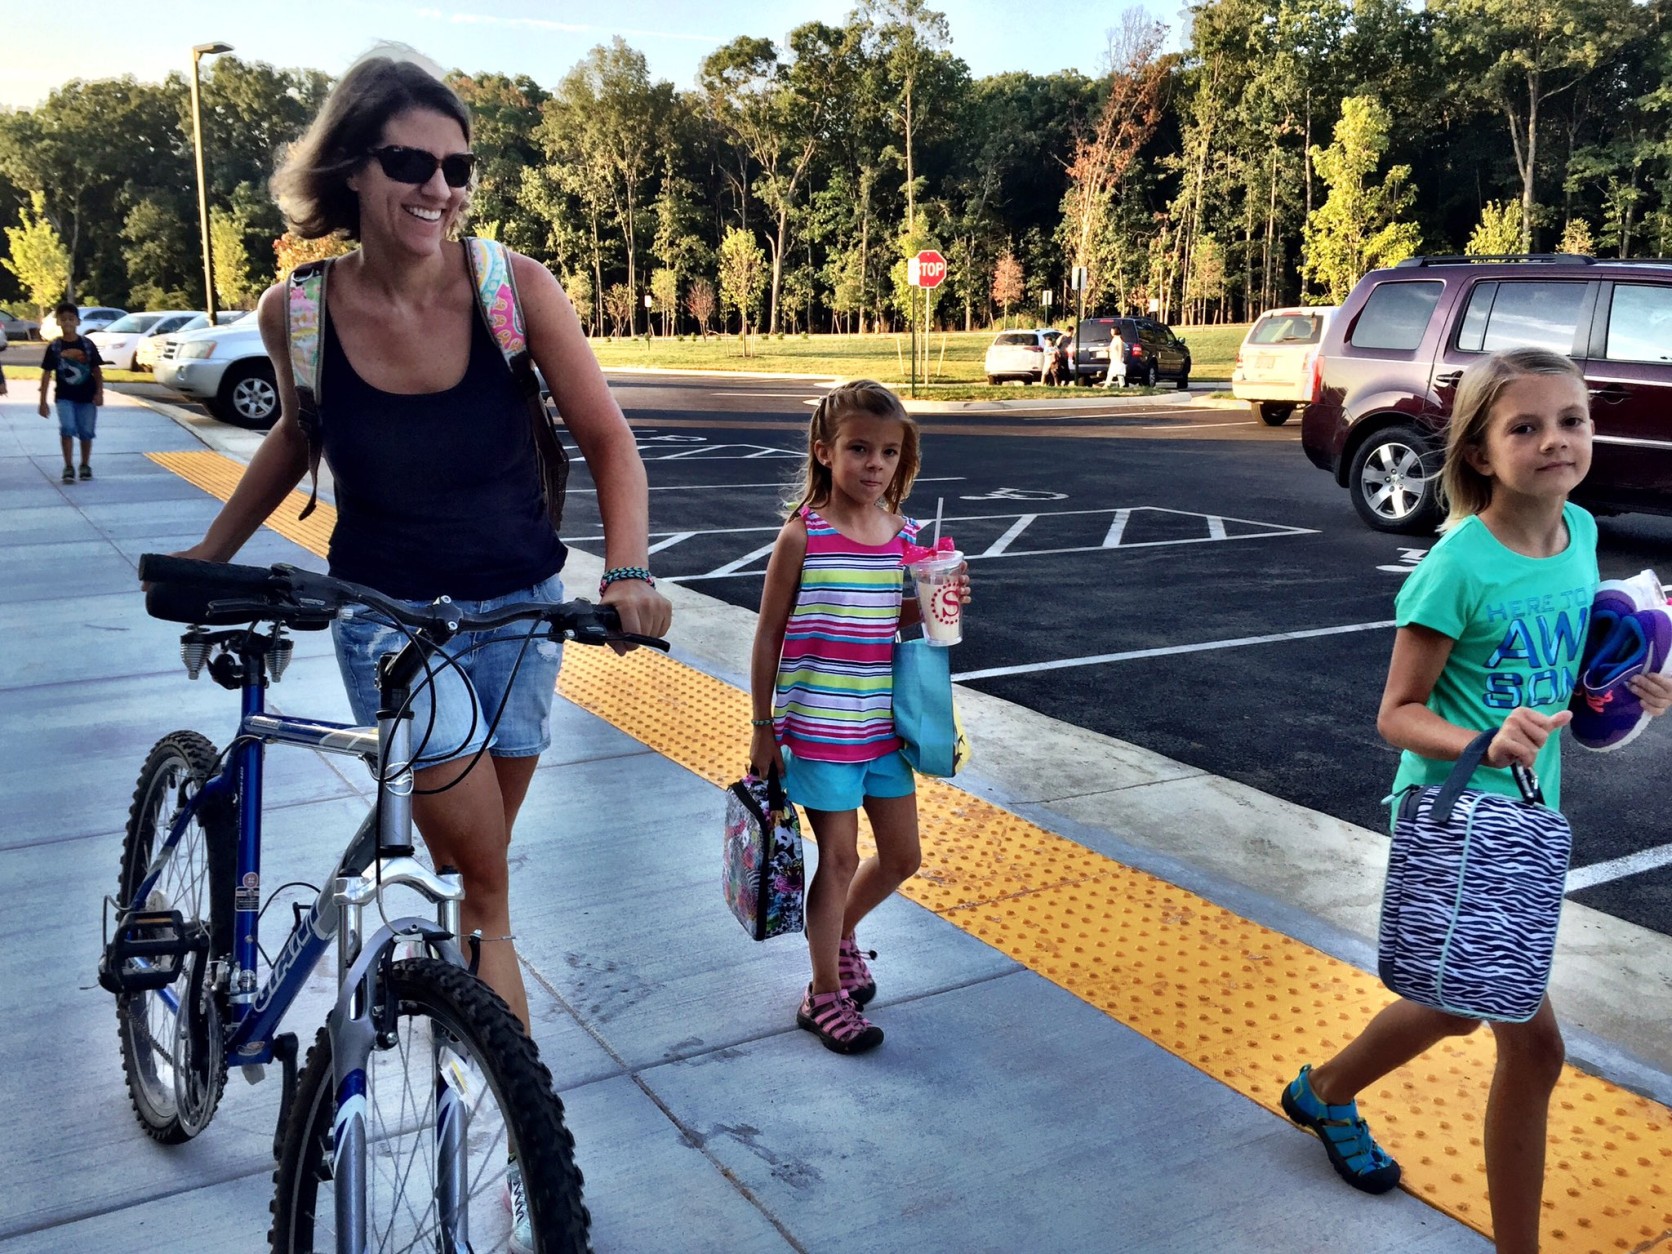 The McMahon family arrives for the first day of school at Madison's Trust Elementary, in Loudoun County. Students in Loudoun County returned to class before Labor Day, after getting a waiver from the state.  (WTOP/Neal Augenstein)